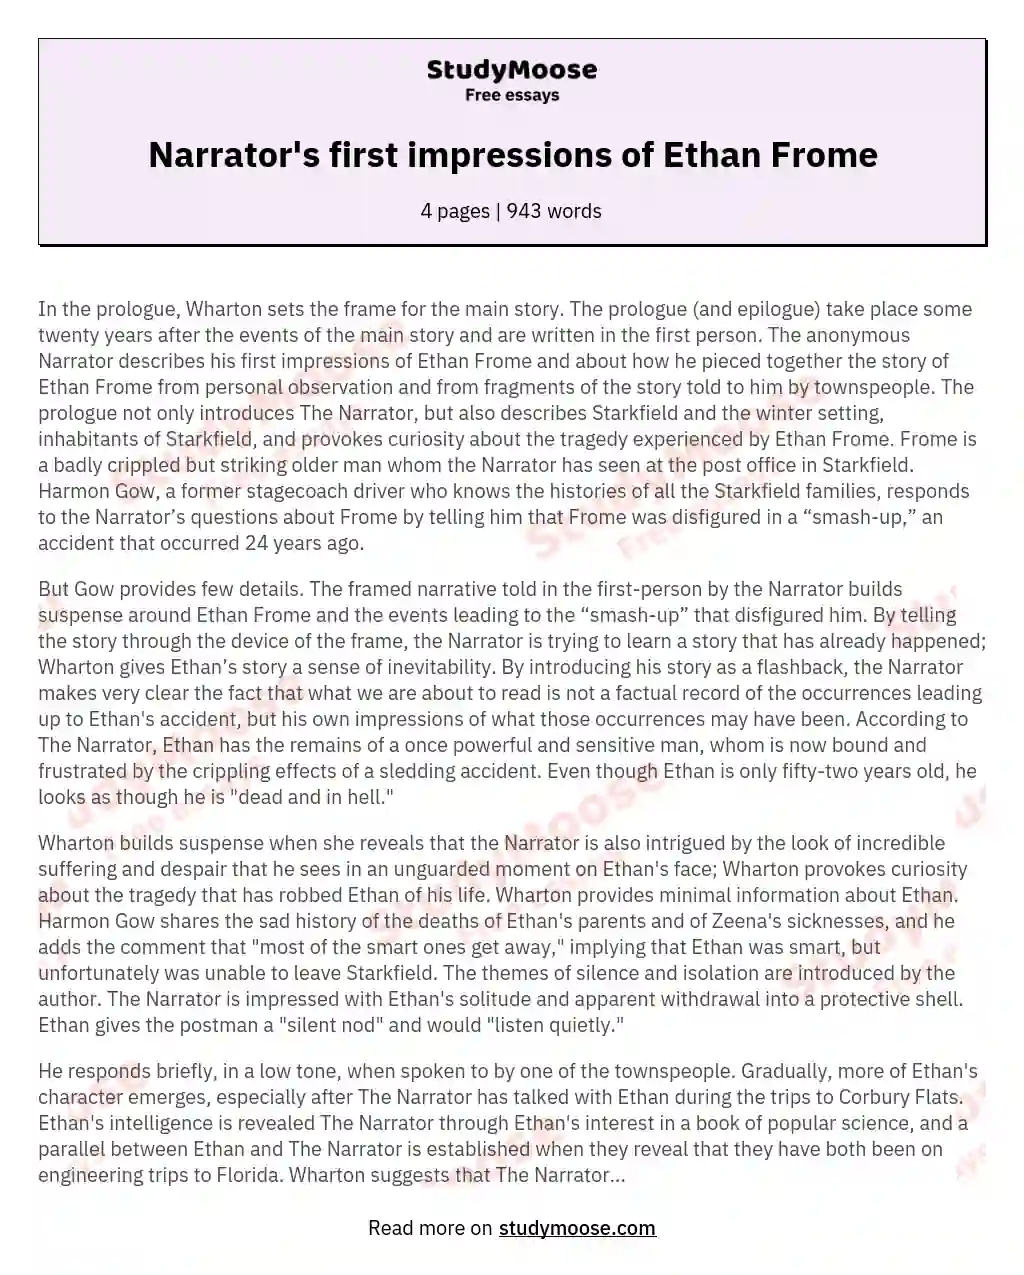 Narrator's first impressions of Ethan Frome